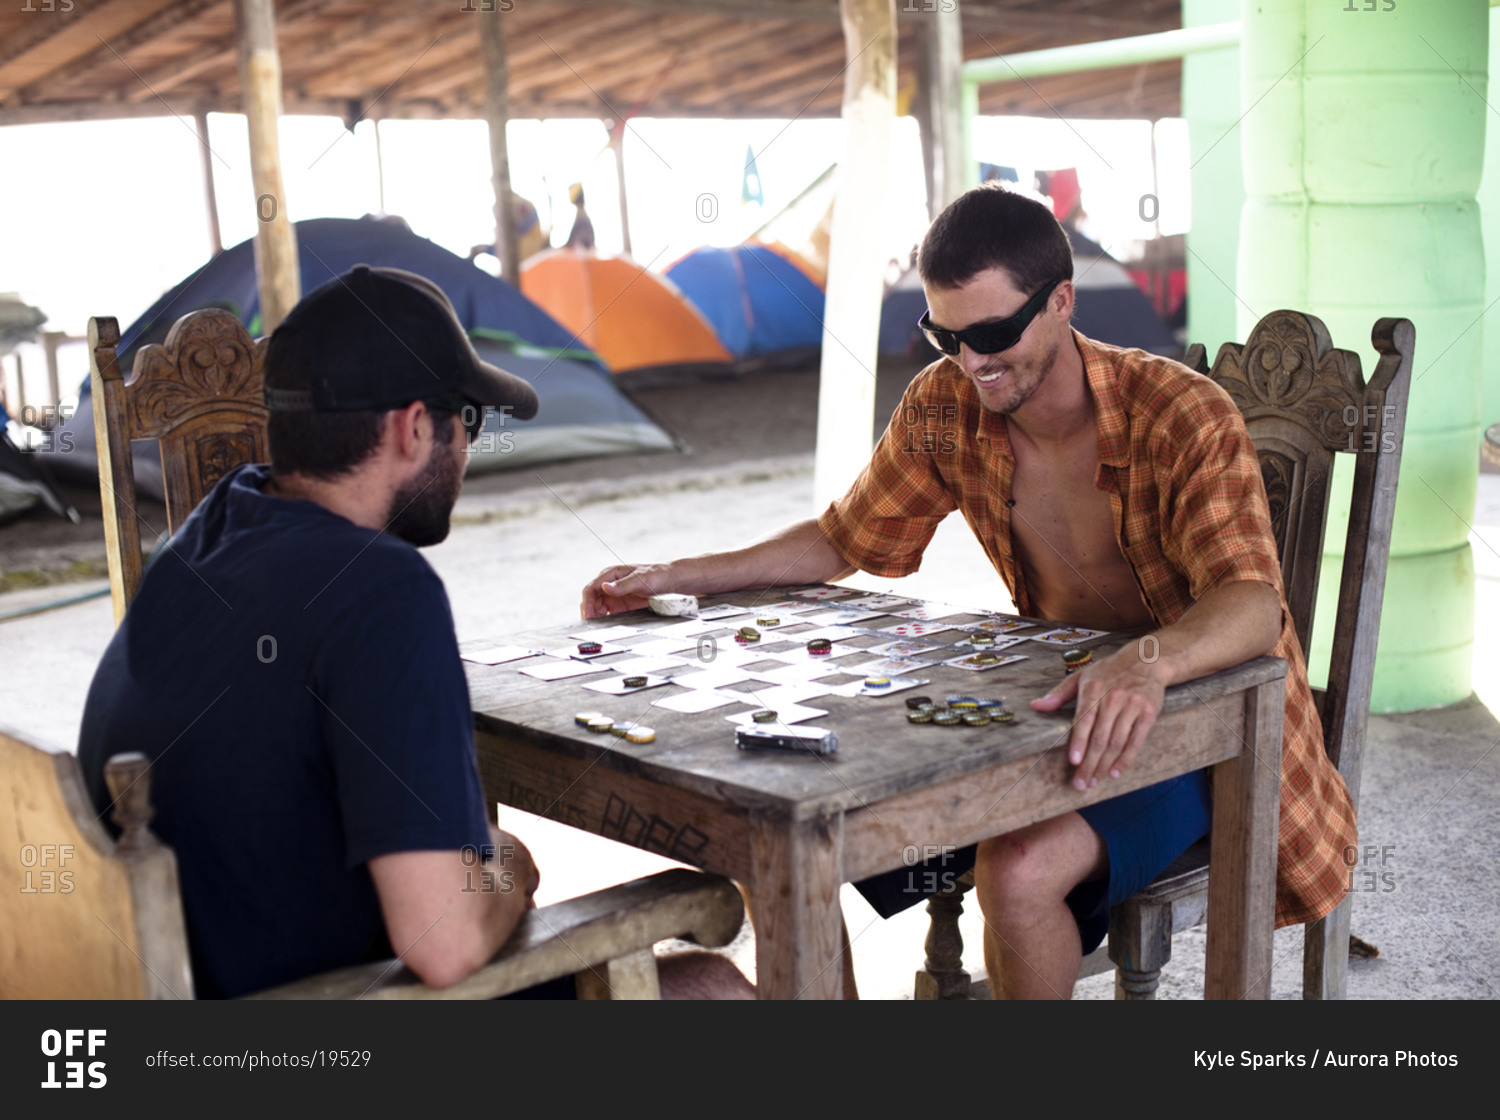 Two male surfers wearing sunglasses play a game of checkers by using playing cards and beer bottle caps during a surf trip to Pascuales, Mexico.